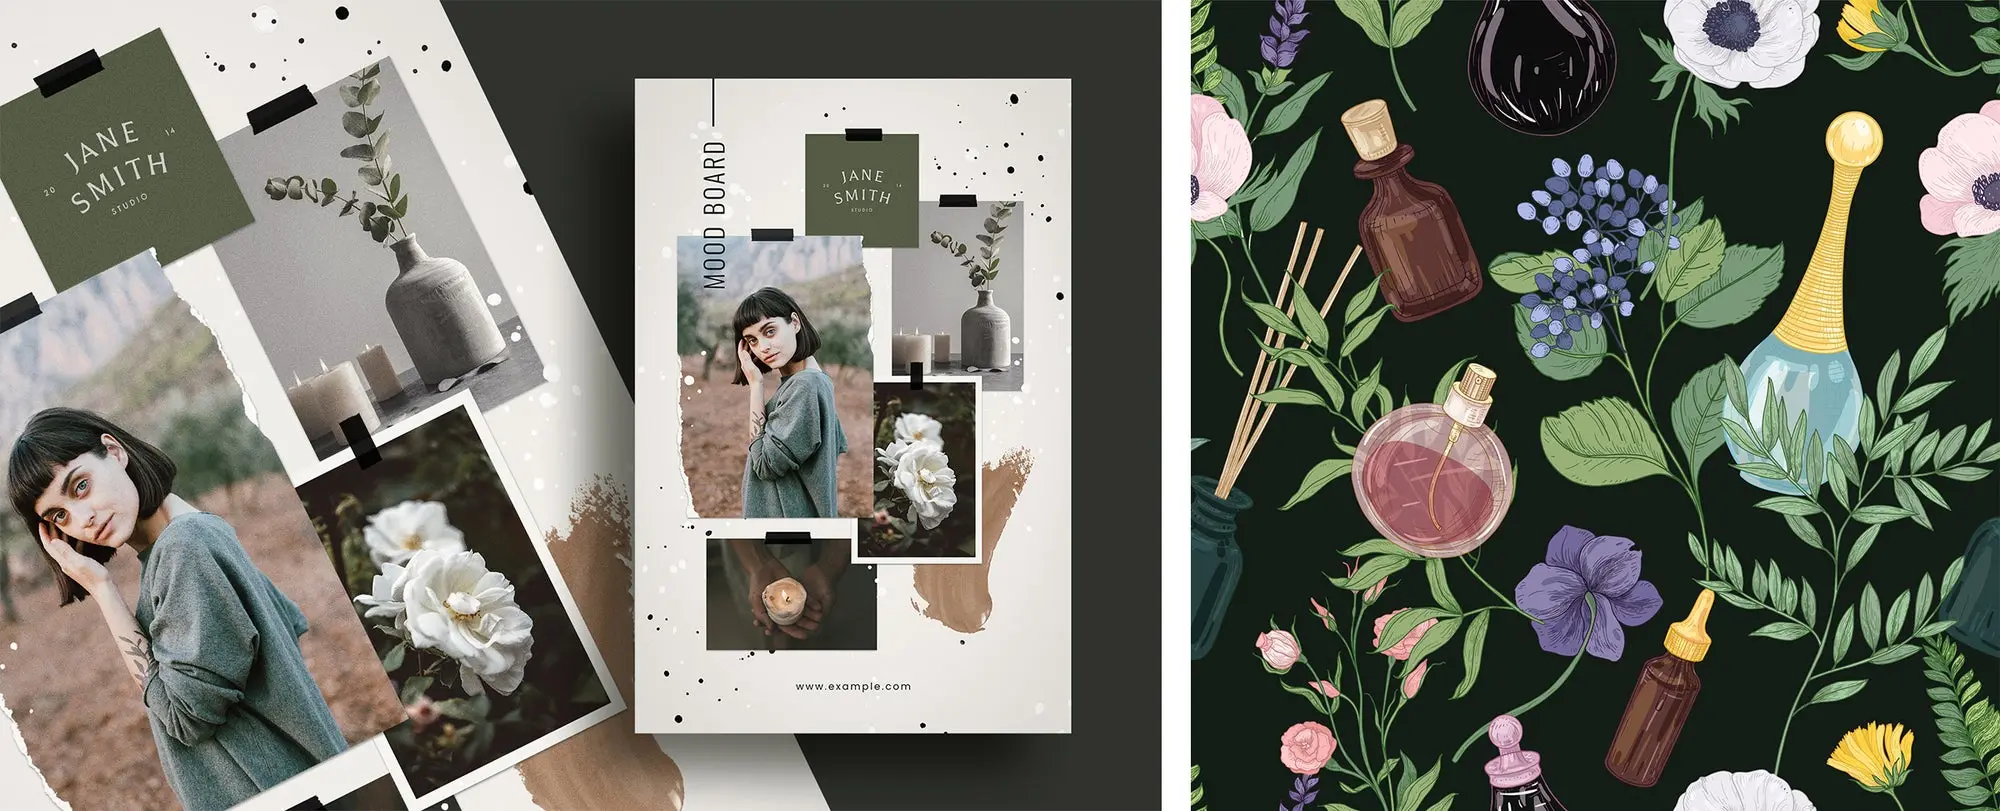 Paper collage showing girl in field, flowers, and ceramics next to black pattern of perfume bottles, incense, and plants. 